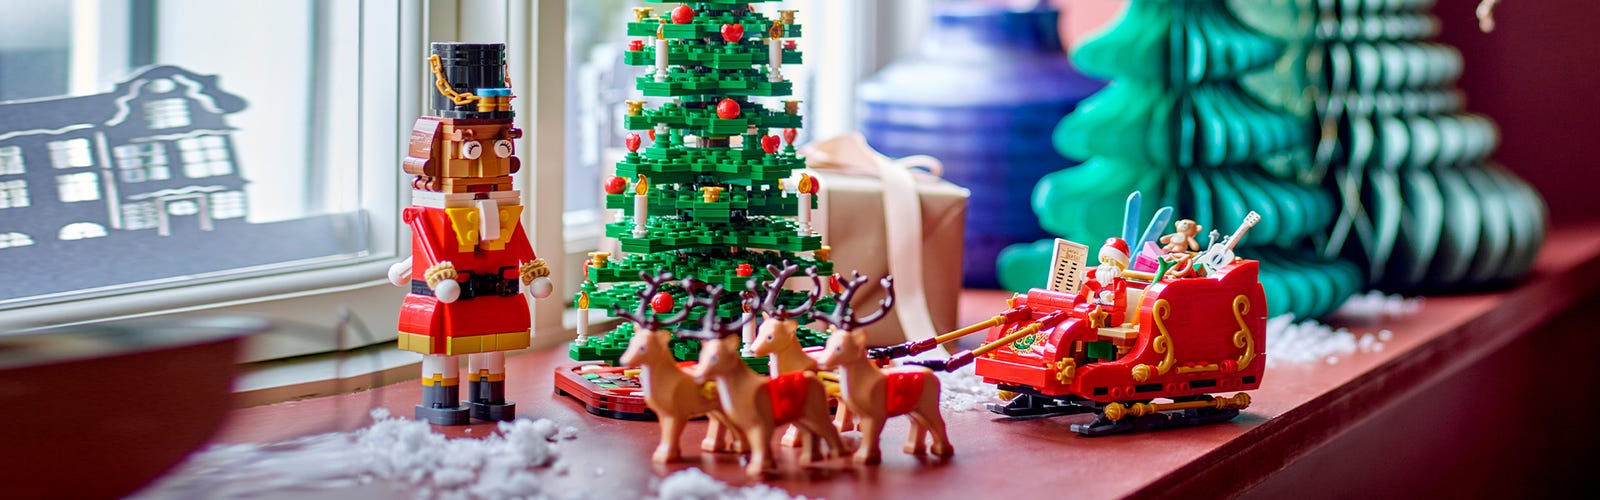 How to Decorate your Home for Christmas with LEGO® Bricks ...